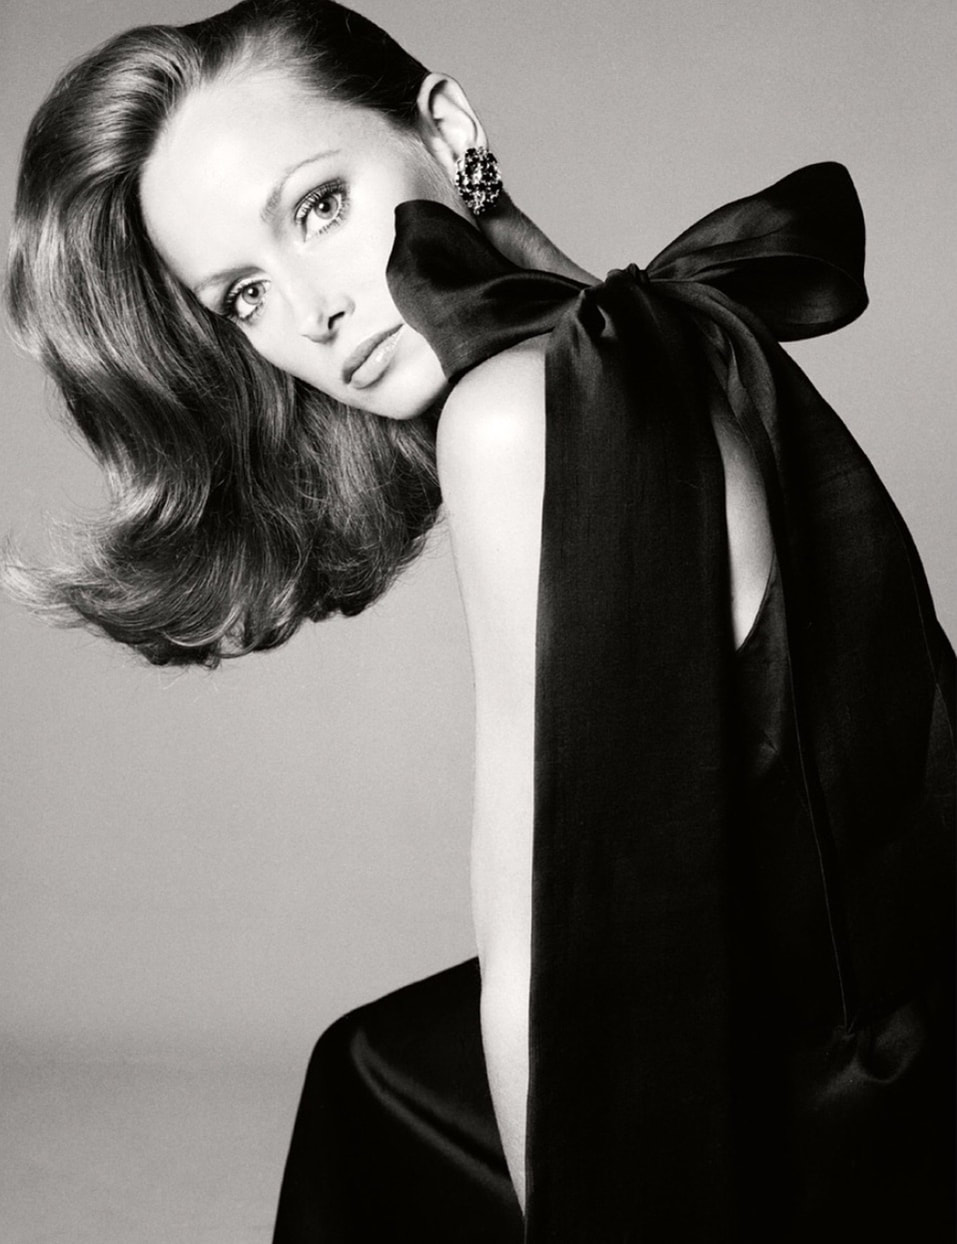 Karen Graham for Vogue, wearing Givenchy dress and jewelry, photo by Richard Avedon, September 1972